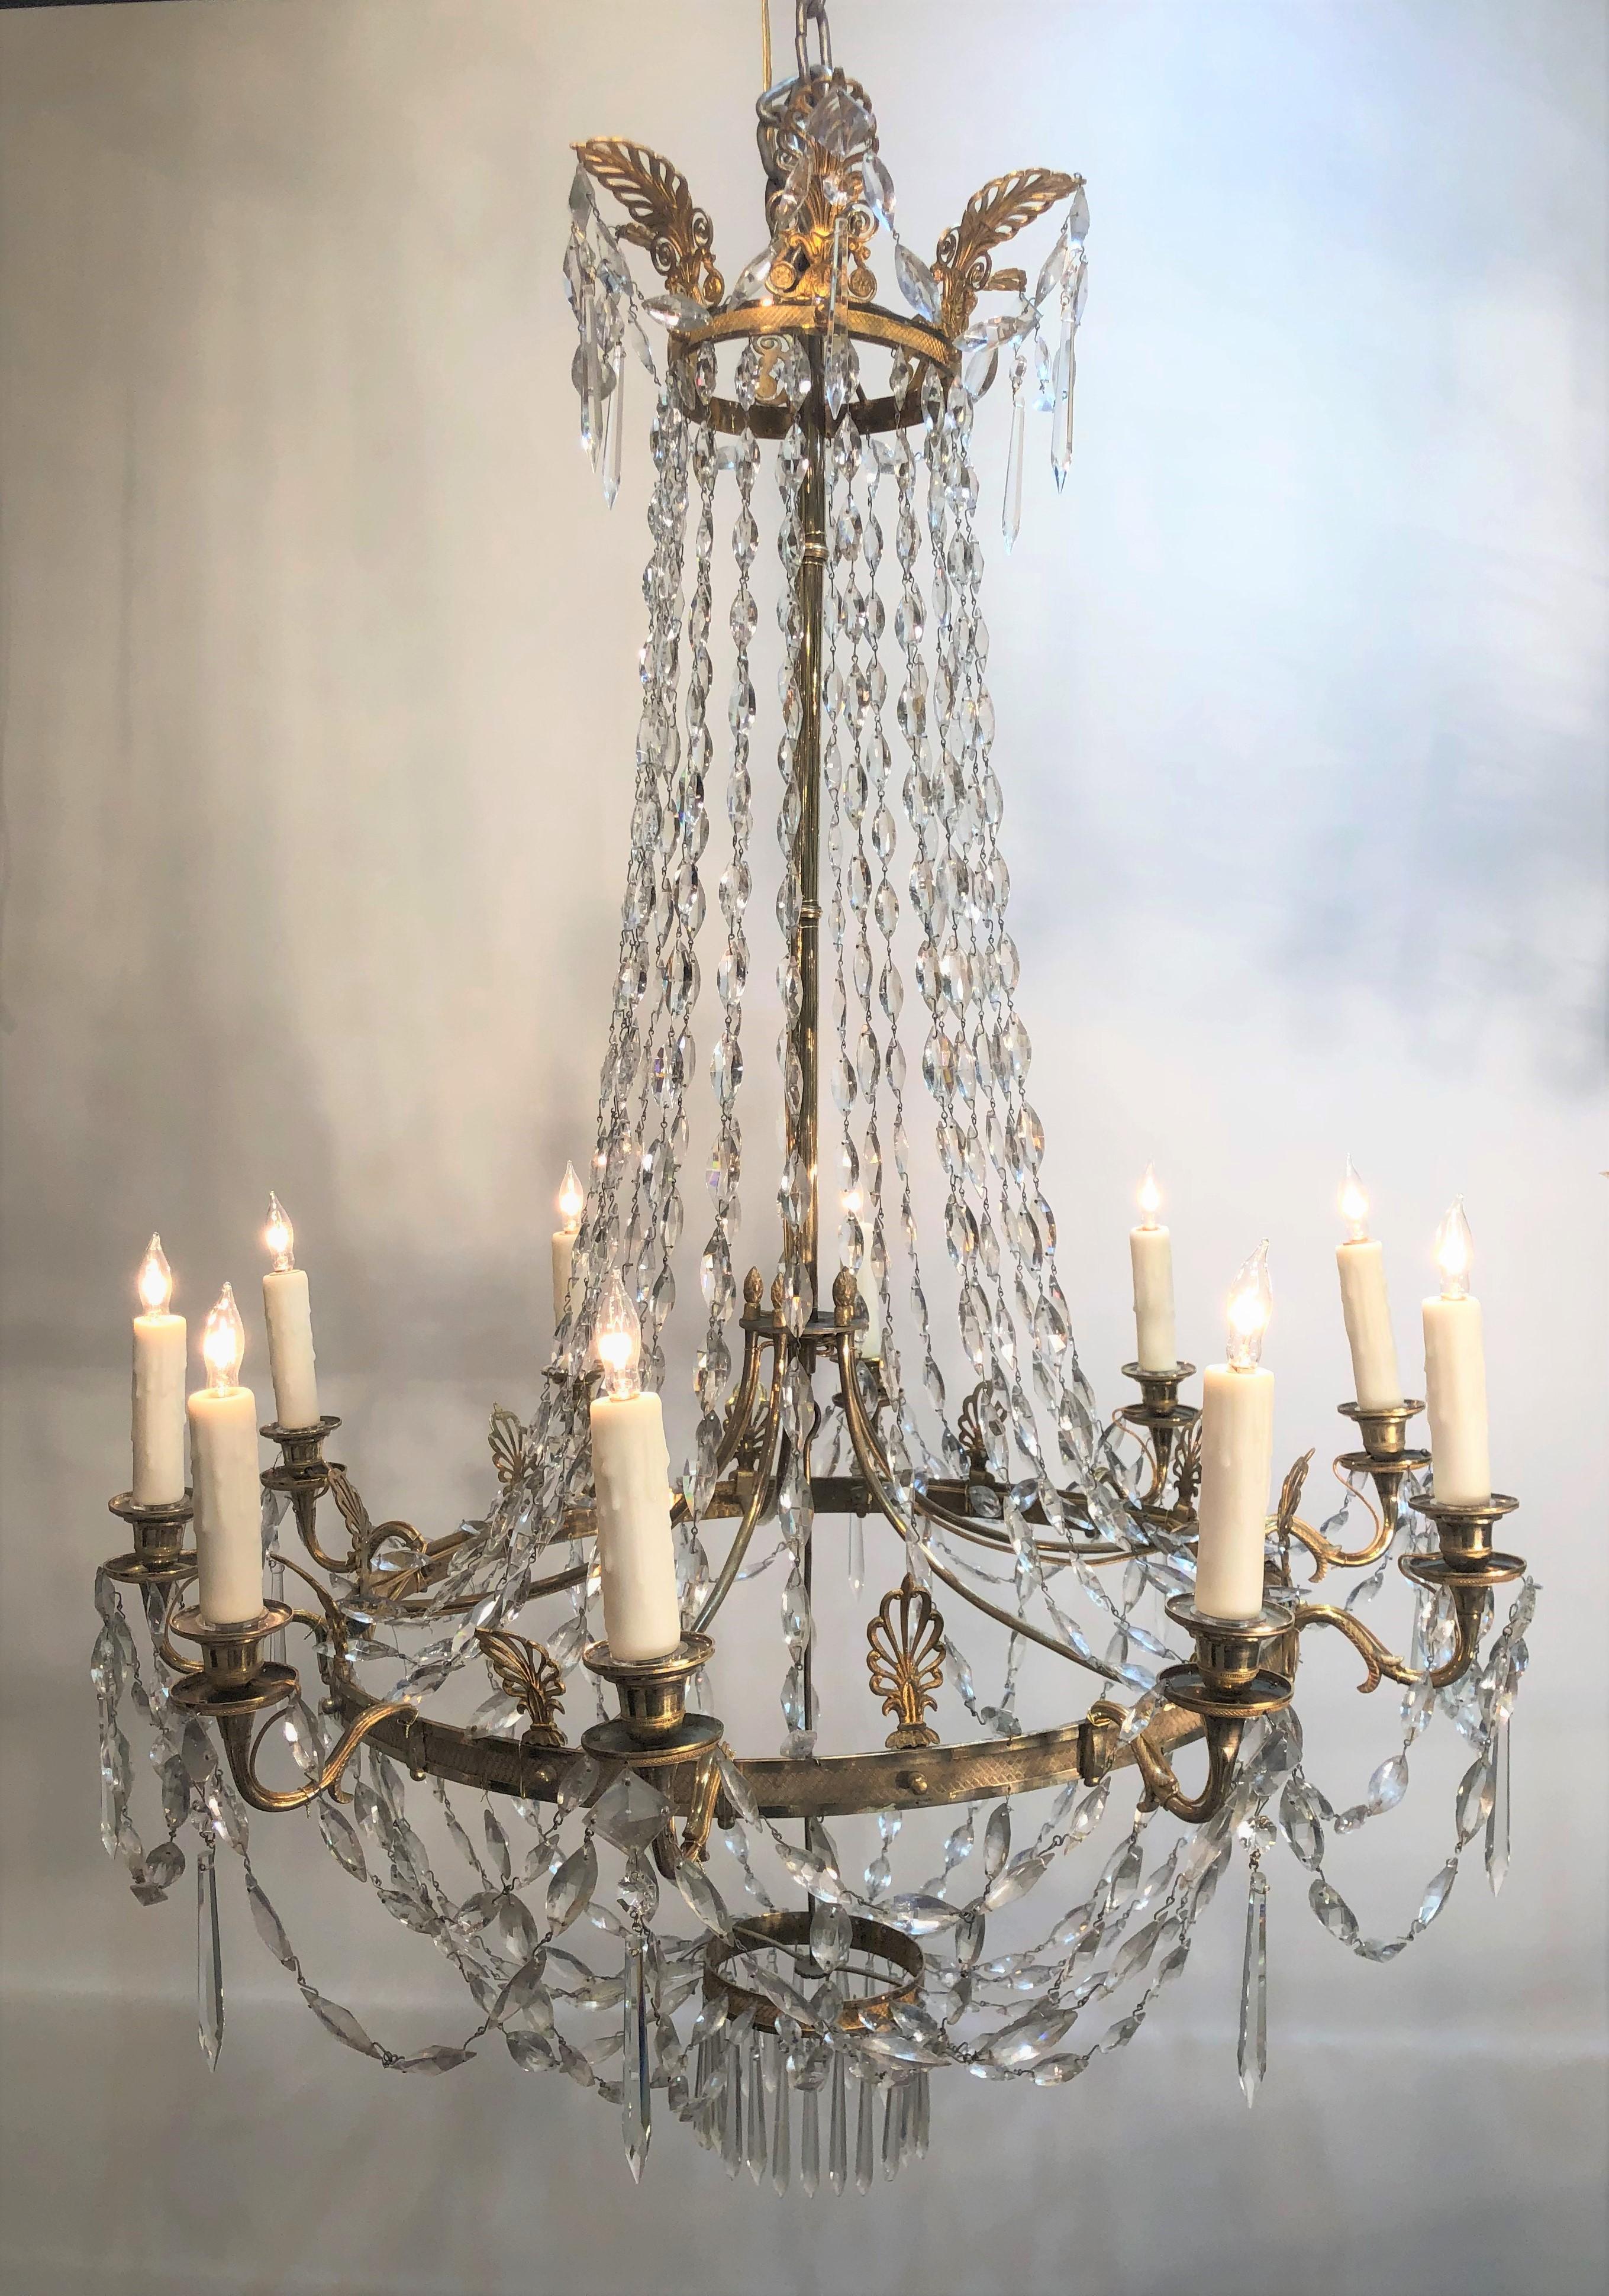 This stately Directoire chandelier has the finest chased work bronze frame with anthemion finials and ten candle arms. The elegant chains are geometric diamond shape handcut crystals.